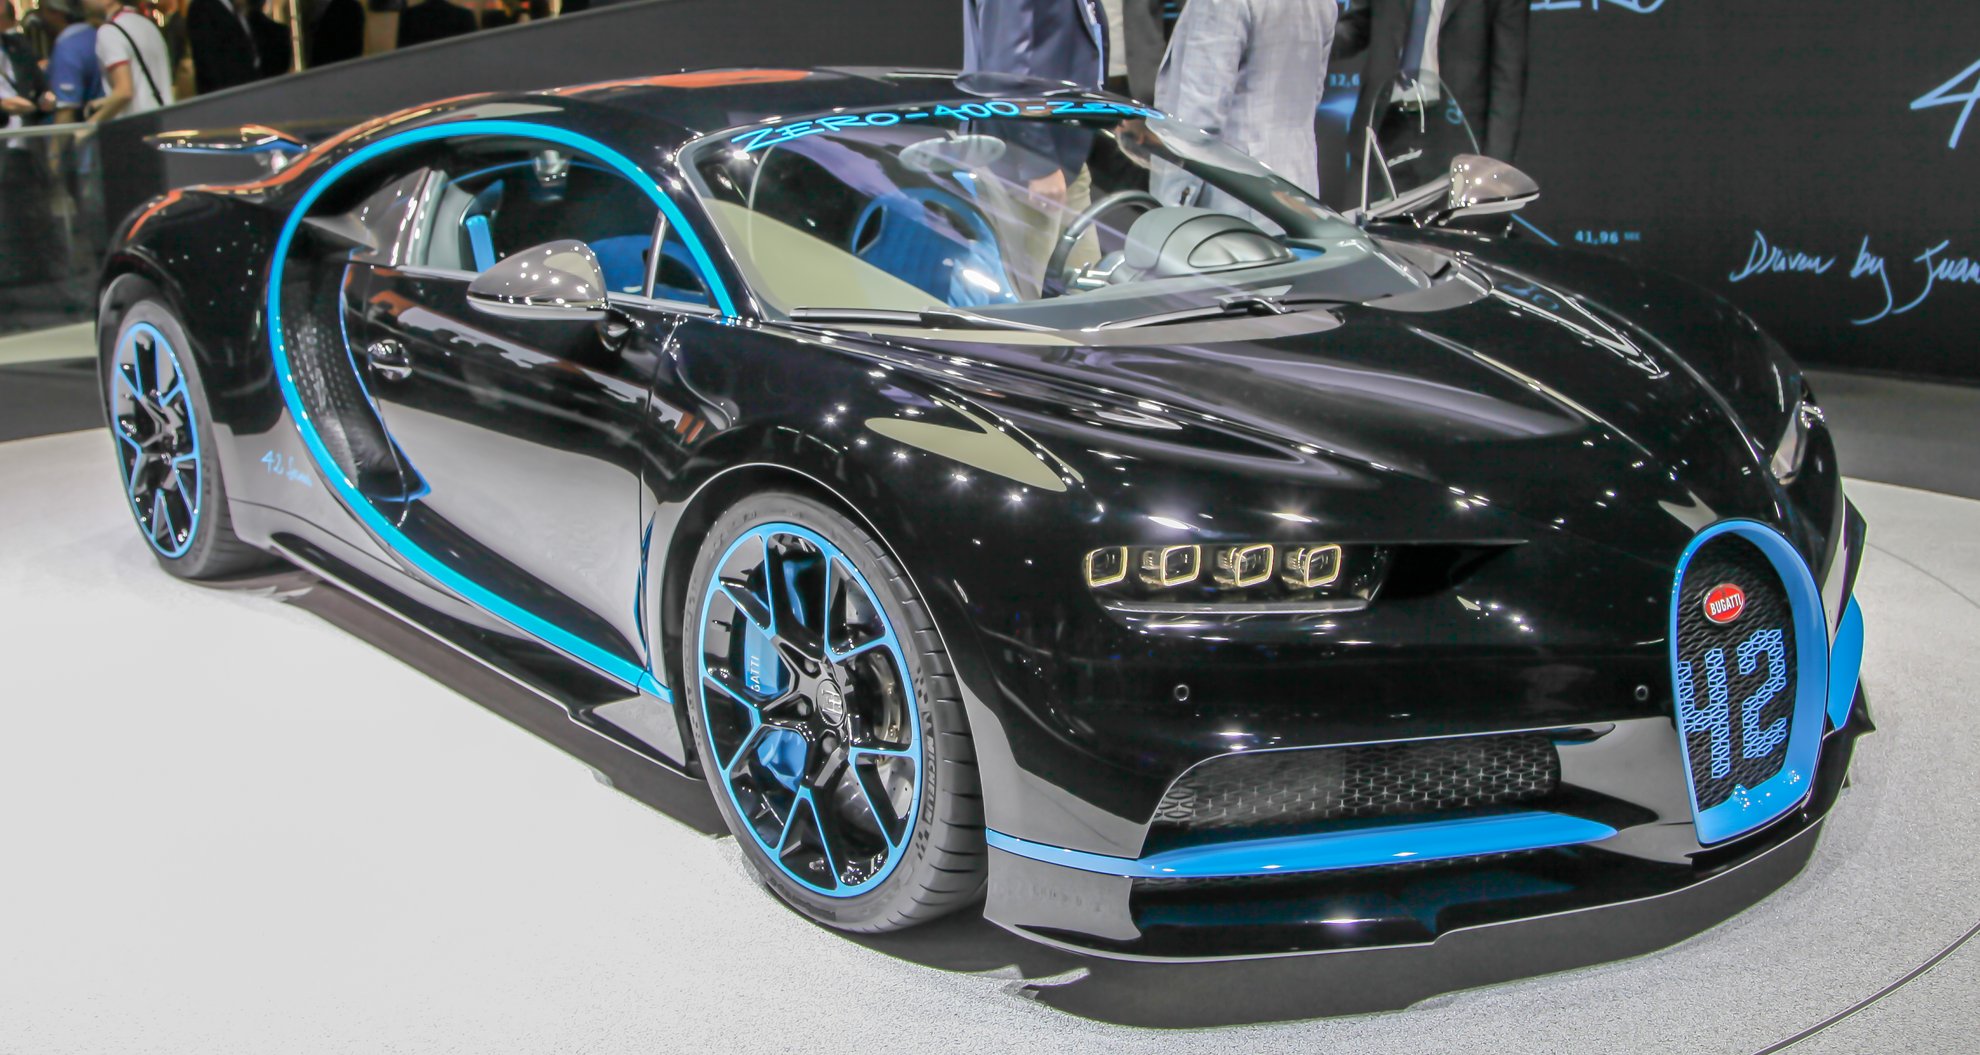 image Volkswagen to make decision about offloading Bugatti